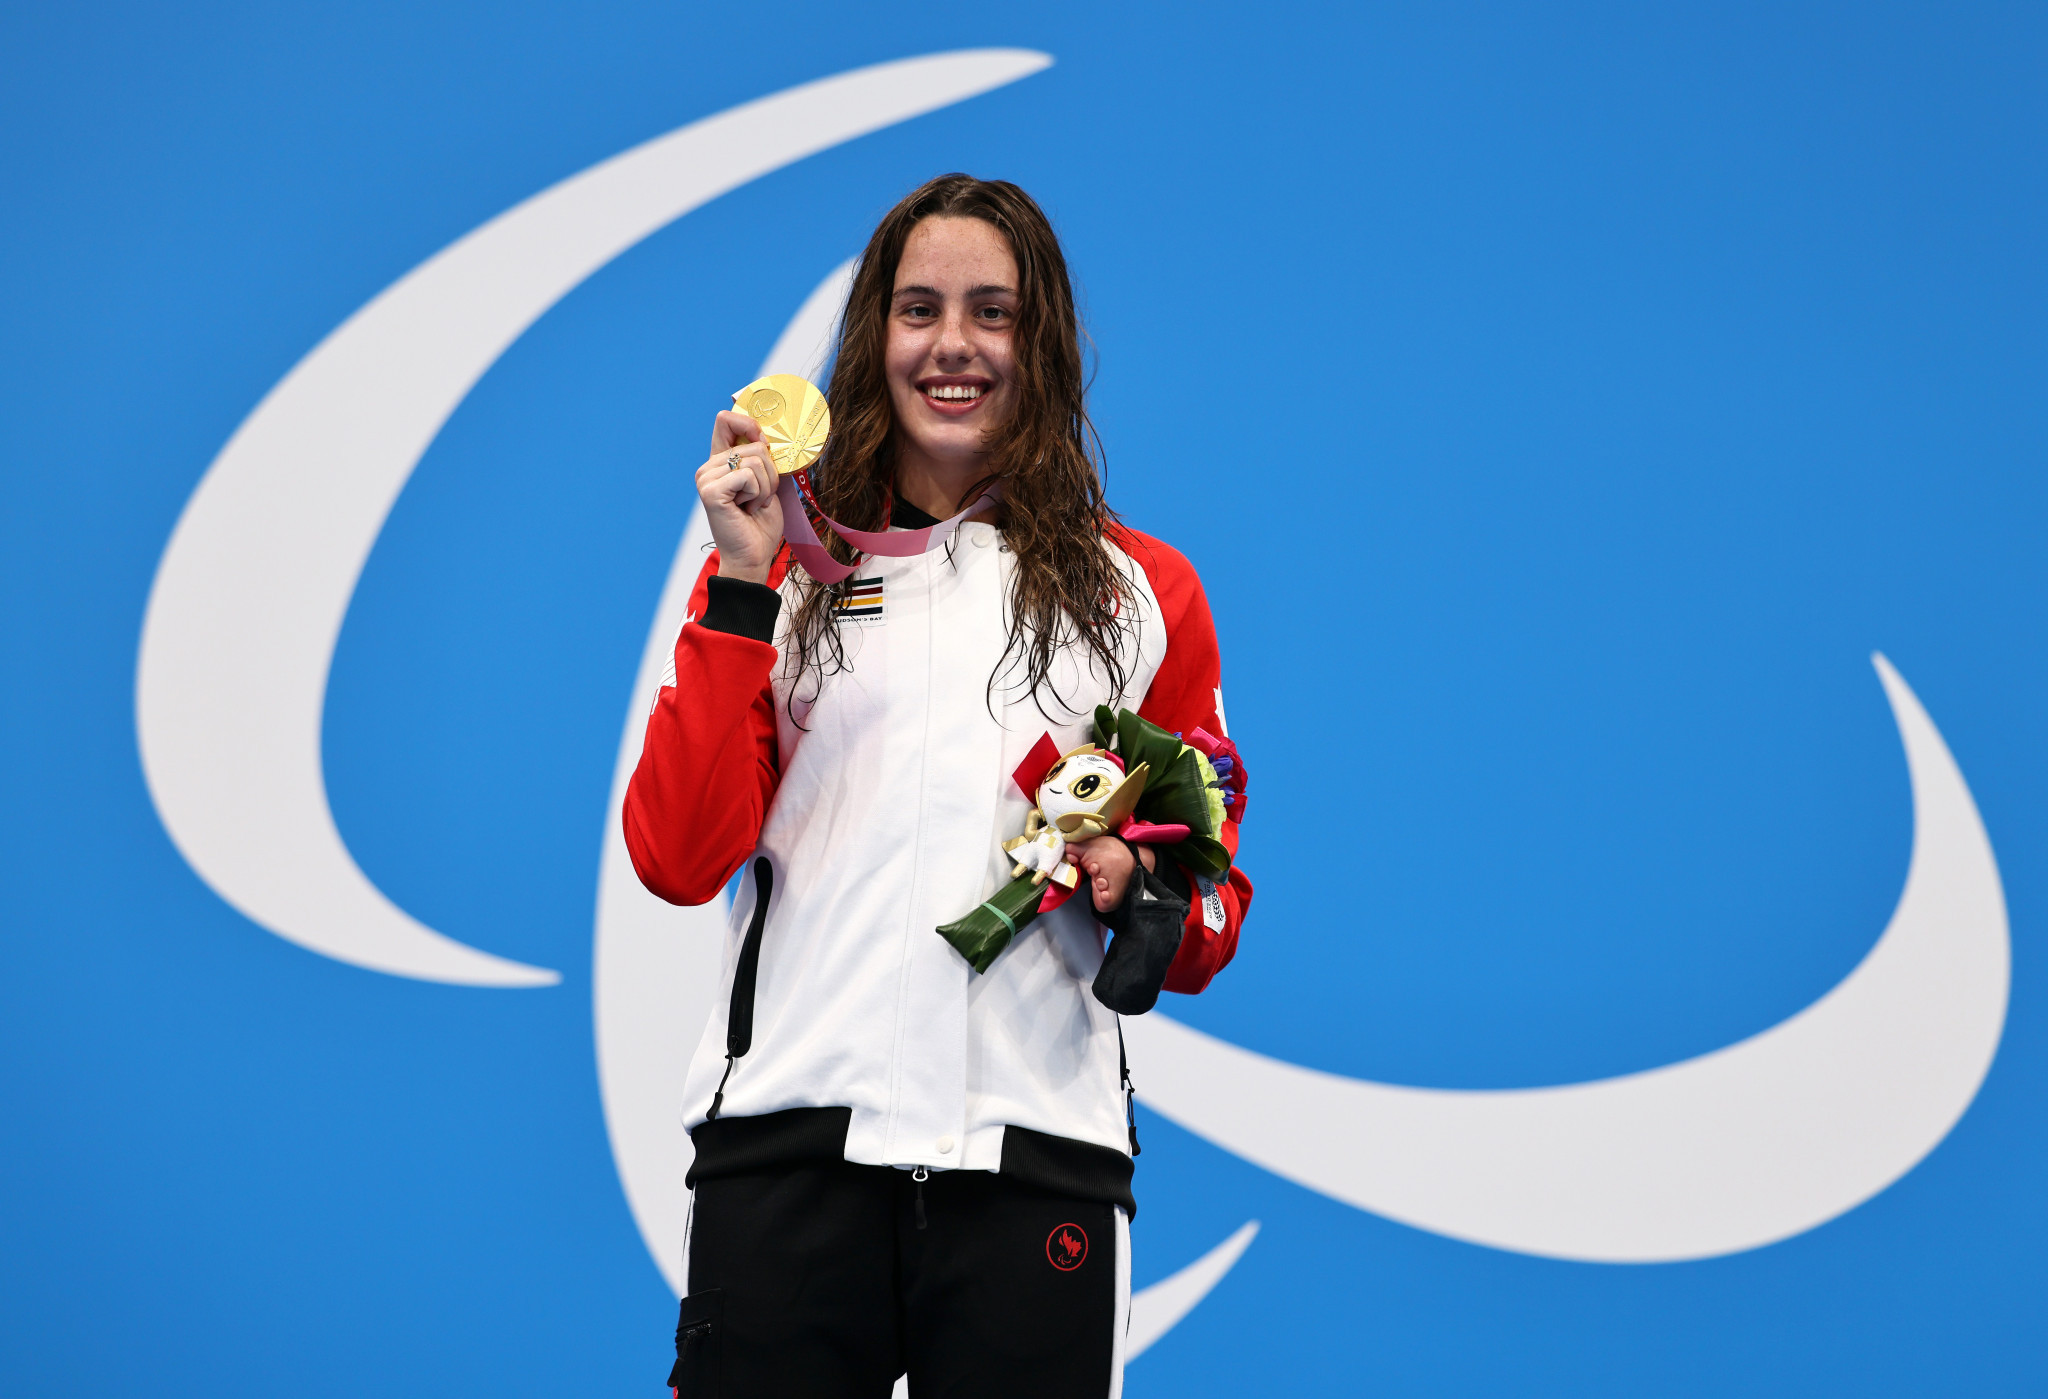 Aurélie Rivard won two Paralympic gold medals in Tokyo in swimming ©Getty Images